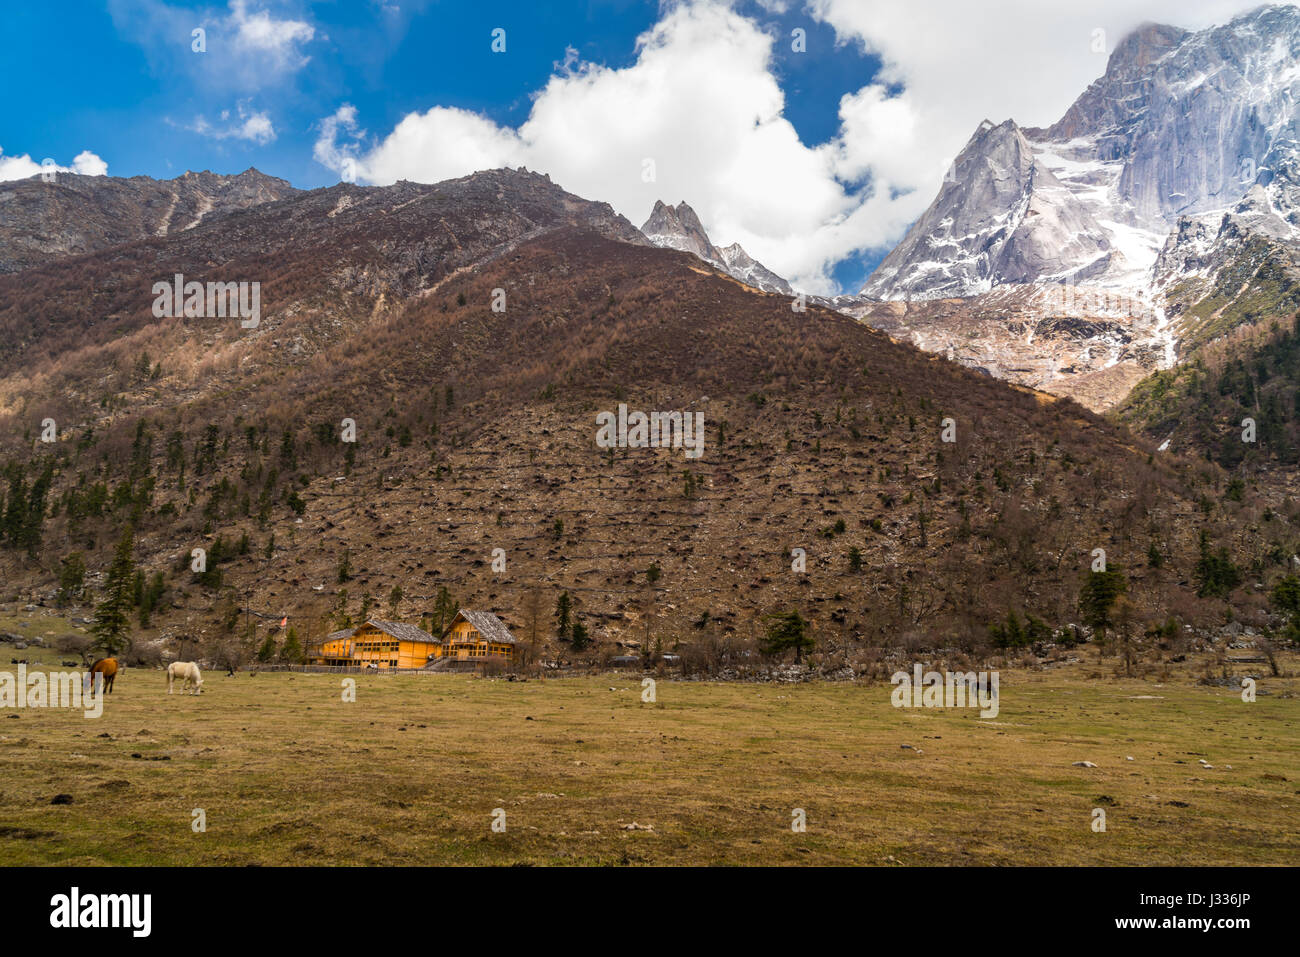 View of snow mountain at Siguniang National Park in Sichuan, China Stock Photo